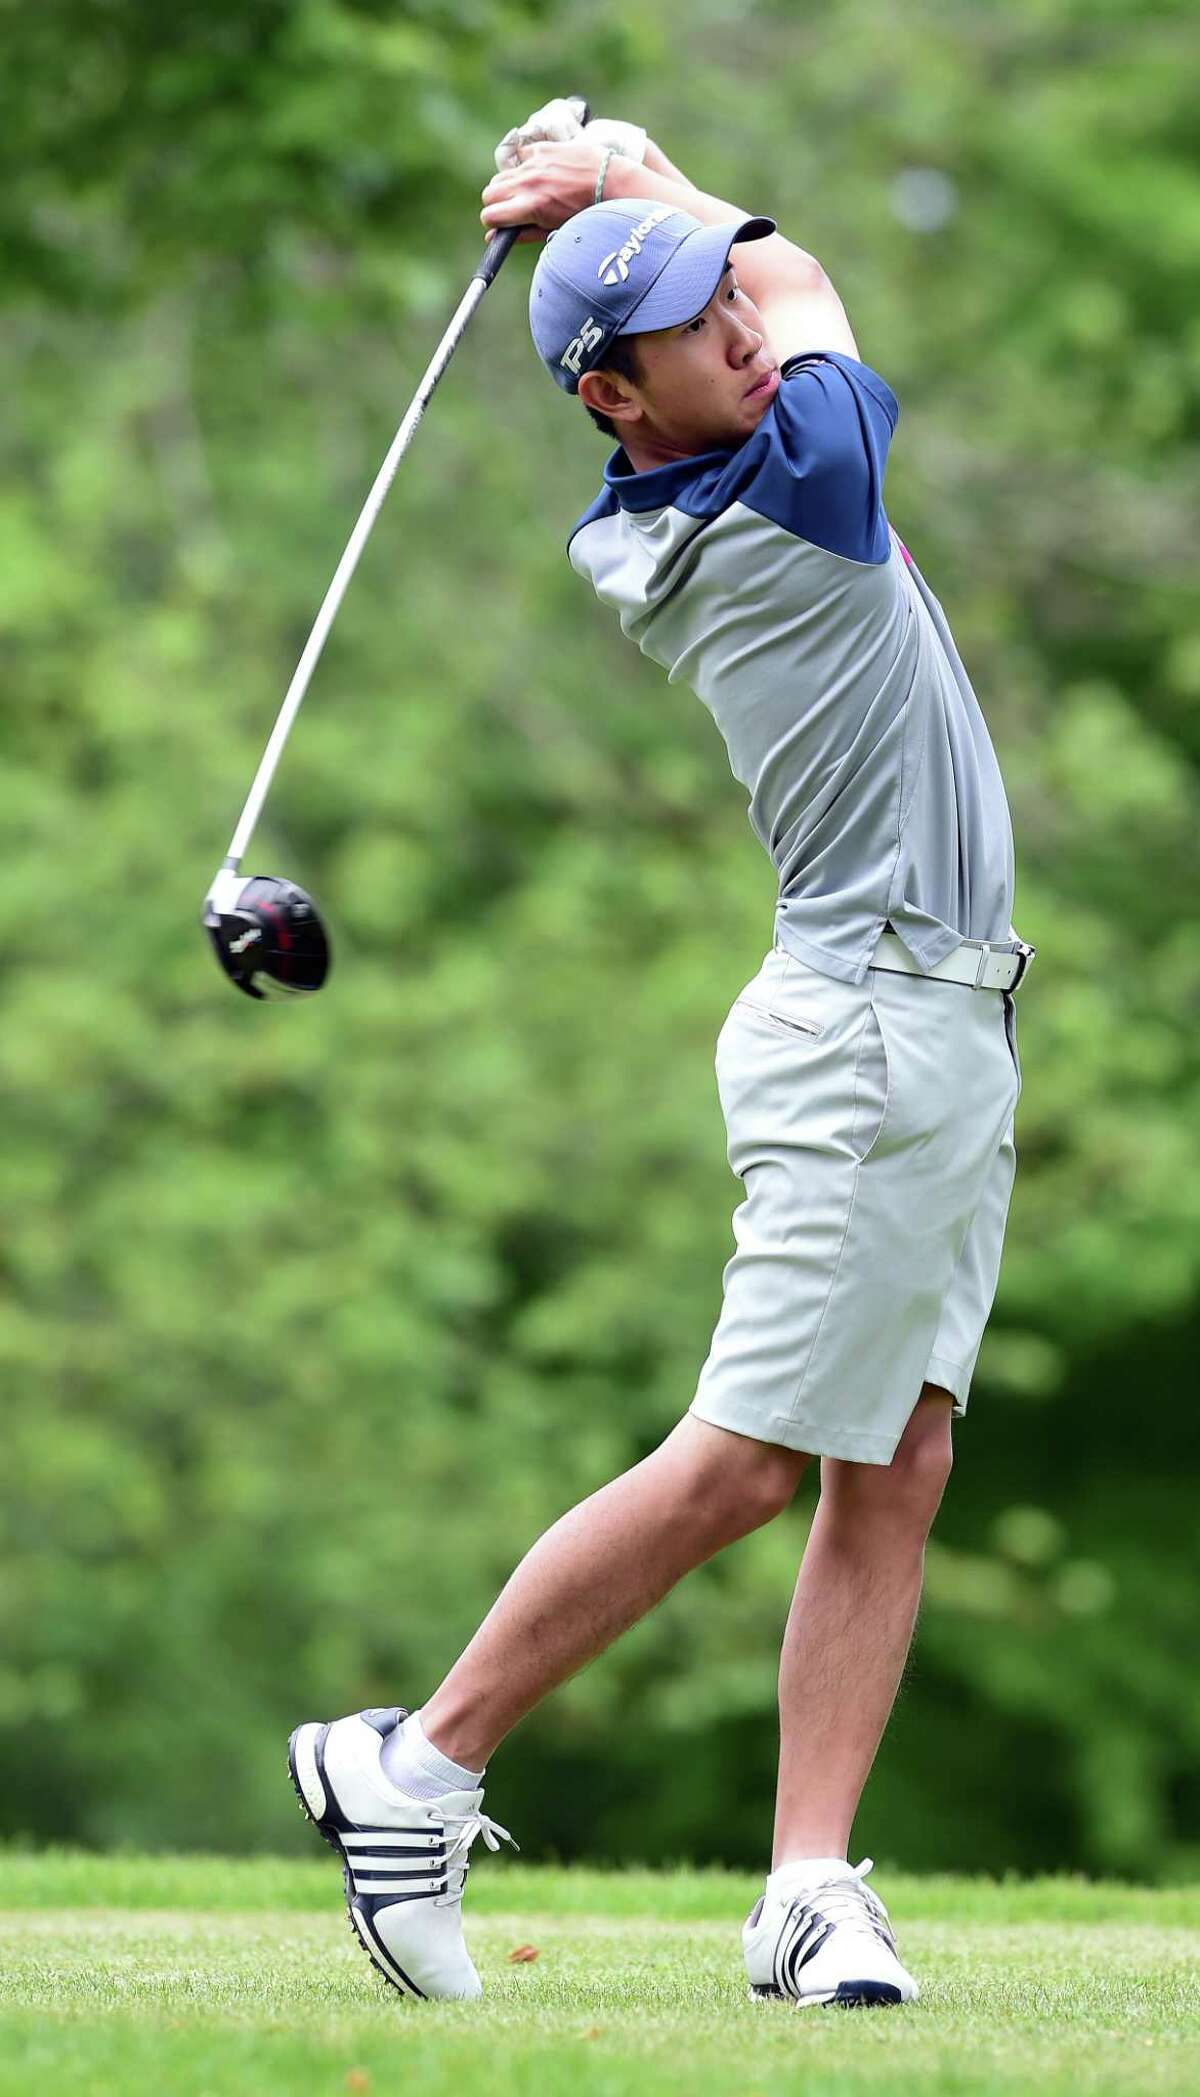 Alex Gu hits off the tee on the 10th hole at the State Amateur qualifier at Oronoque Country Club on Tuesday.